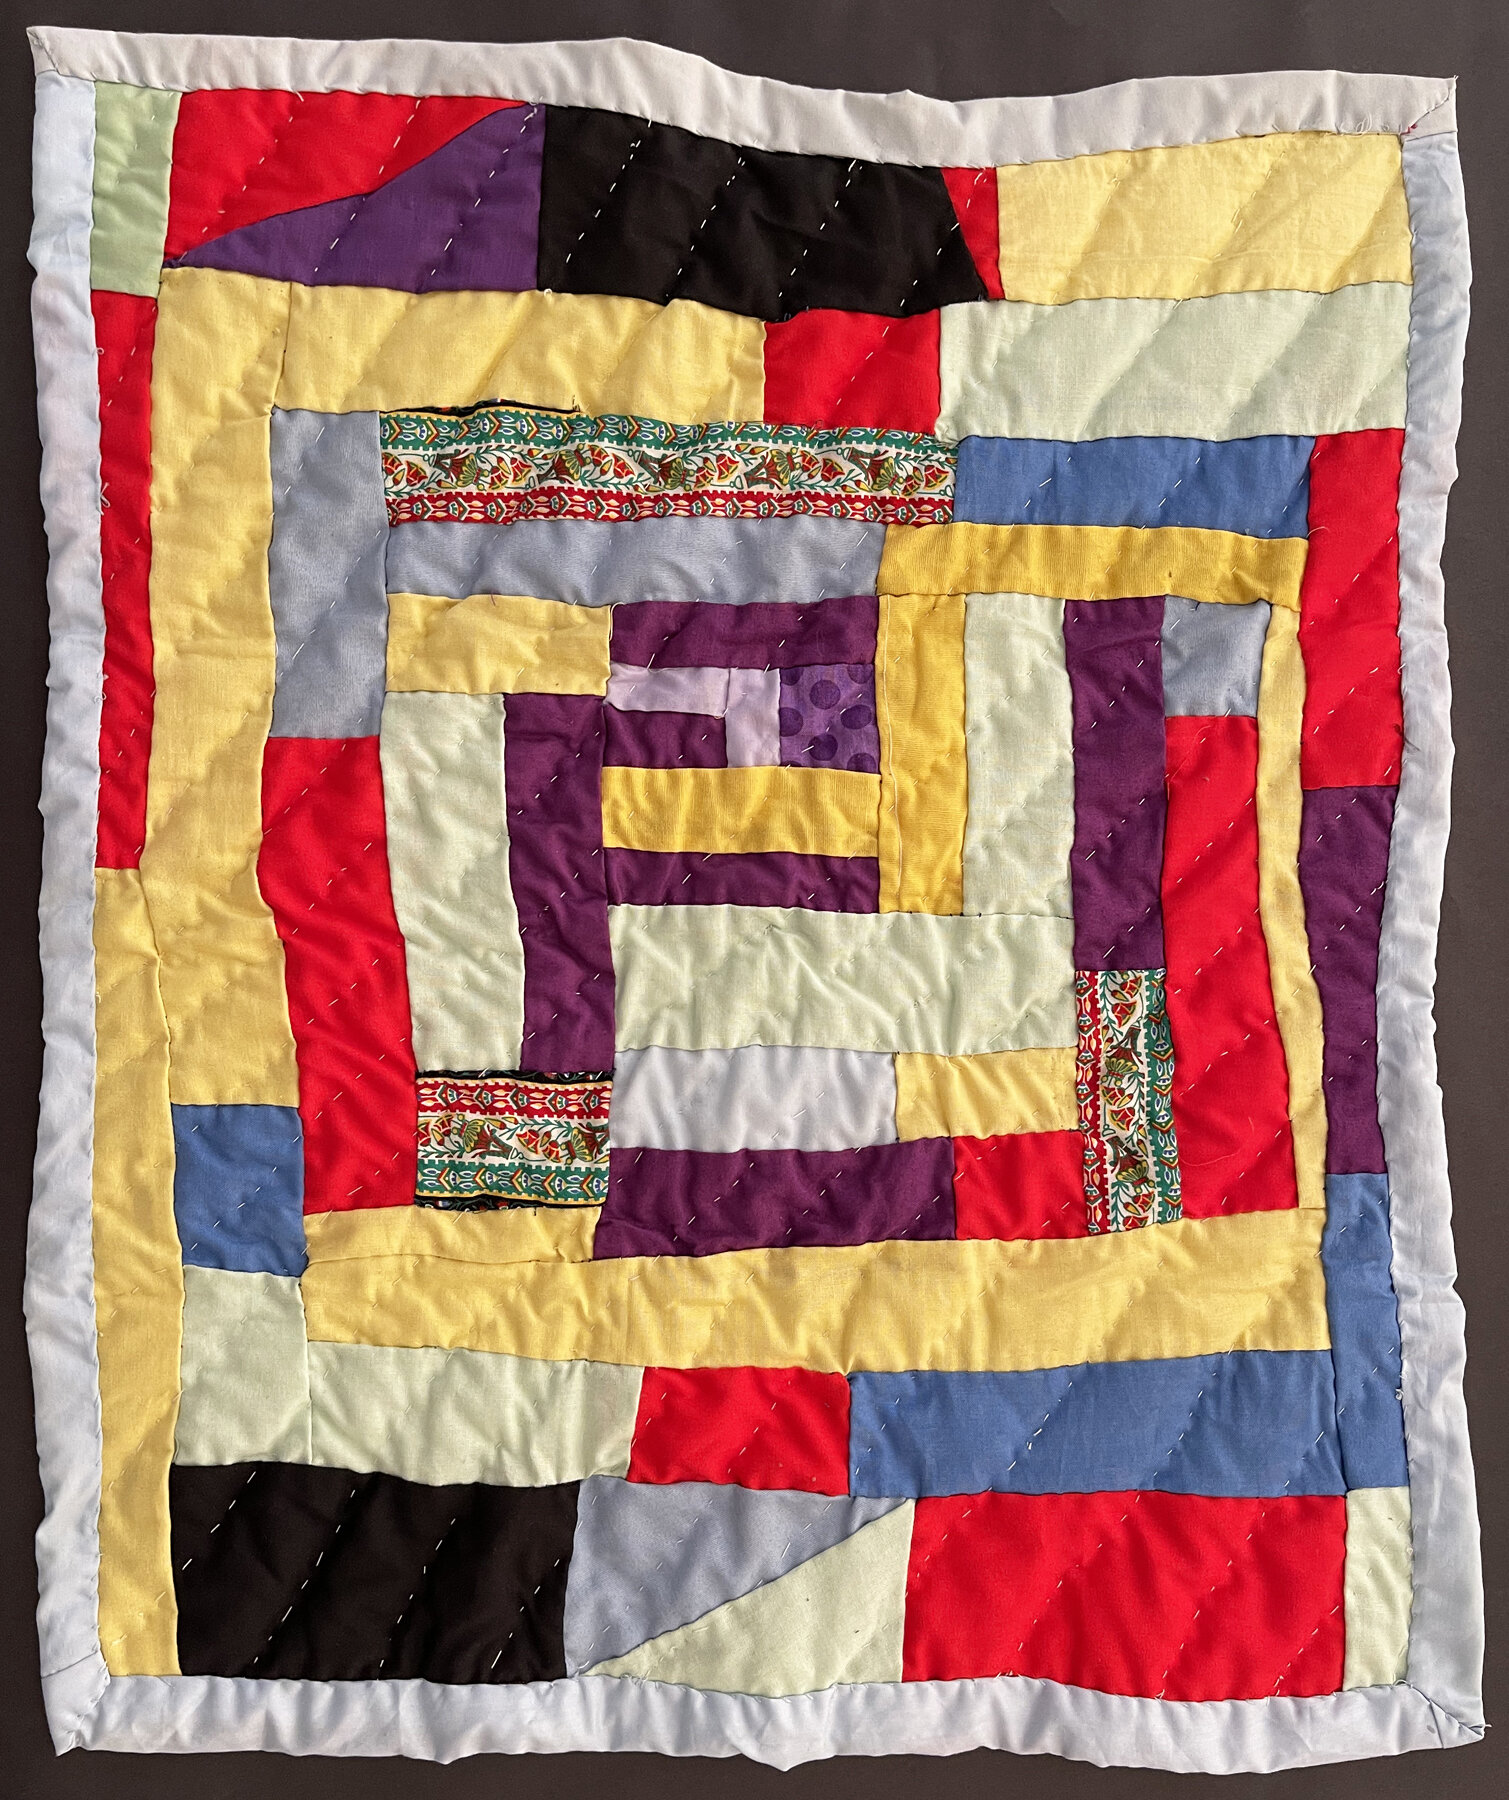   Stella Mae Pettway    Improvisational quilt, 2021.   21” x 19”  Cotton fabrics  Hand-pieced, hand-quilted    ASK ABOUT THIS QUILT   